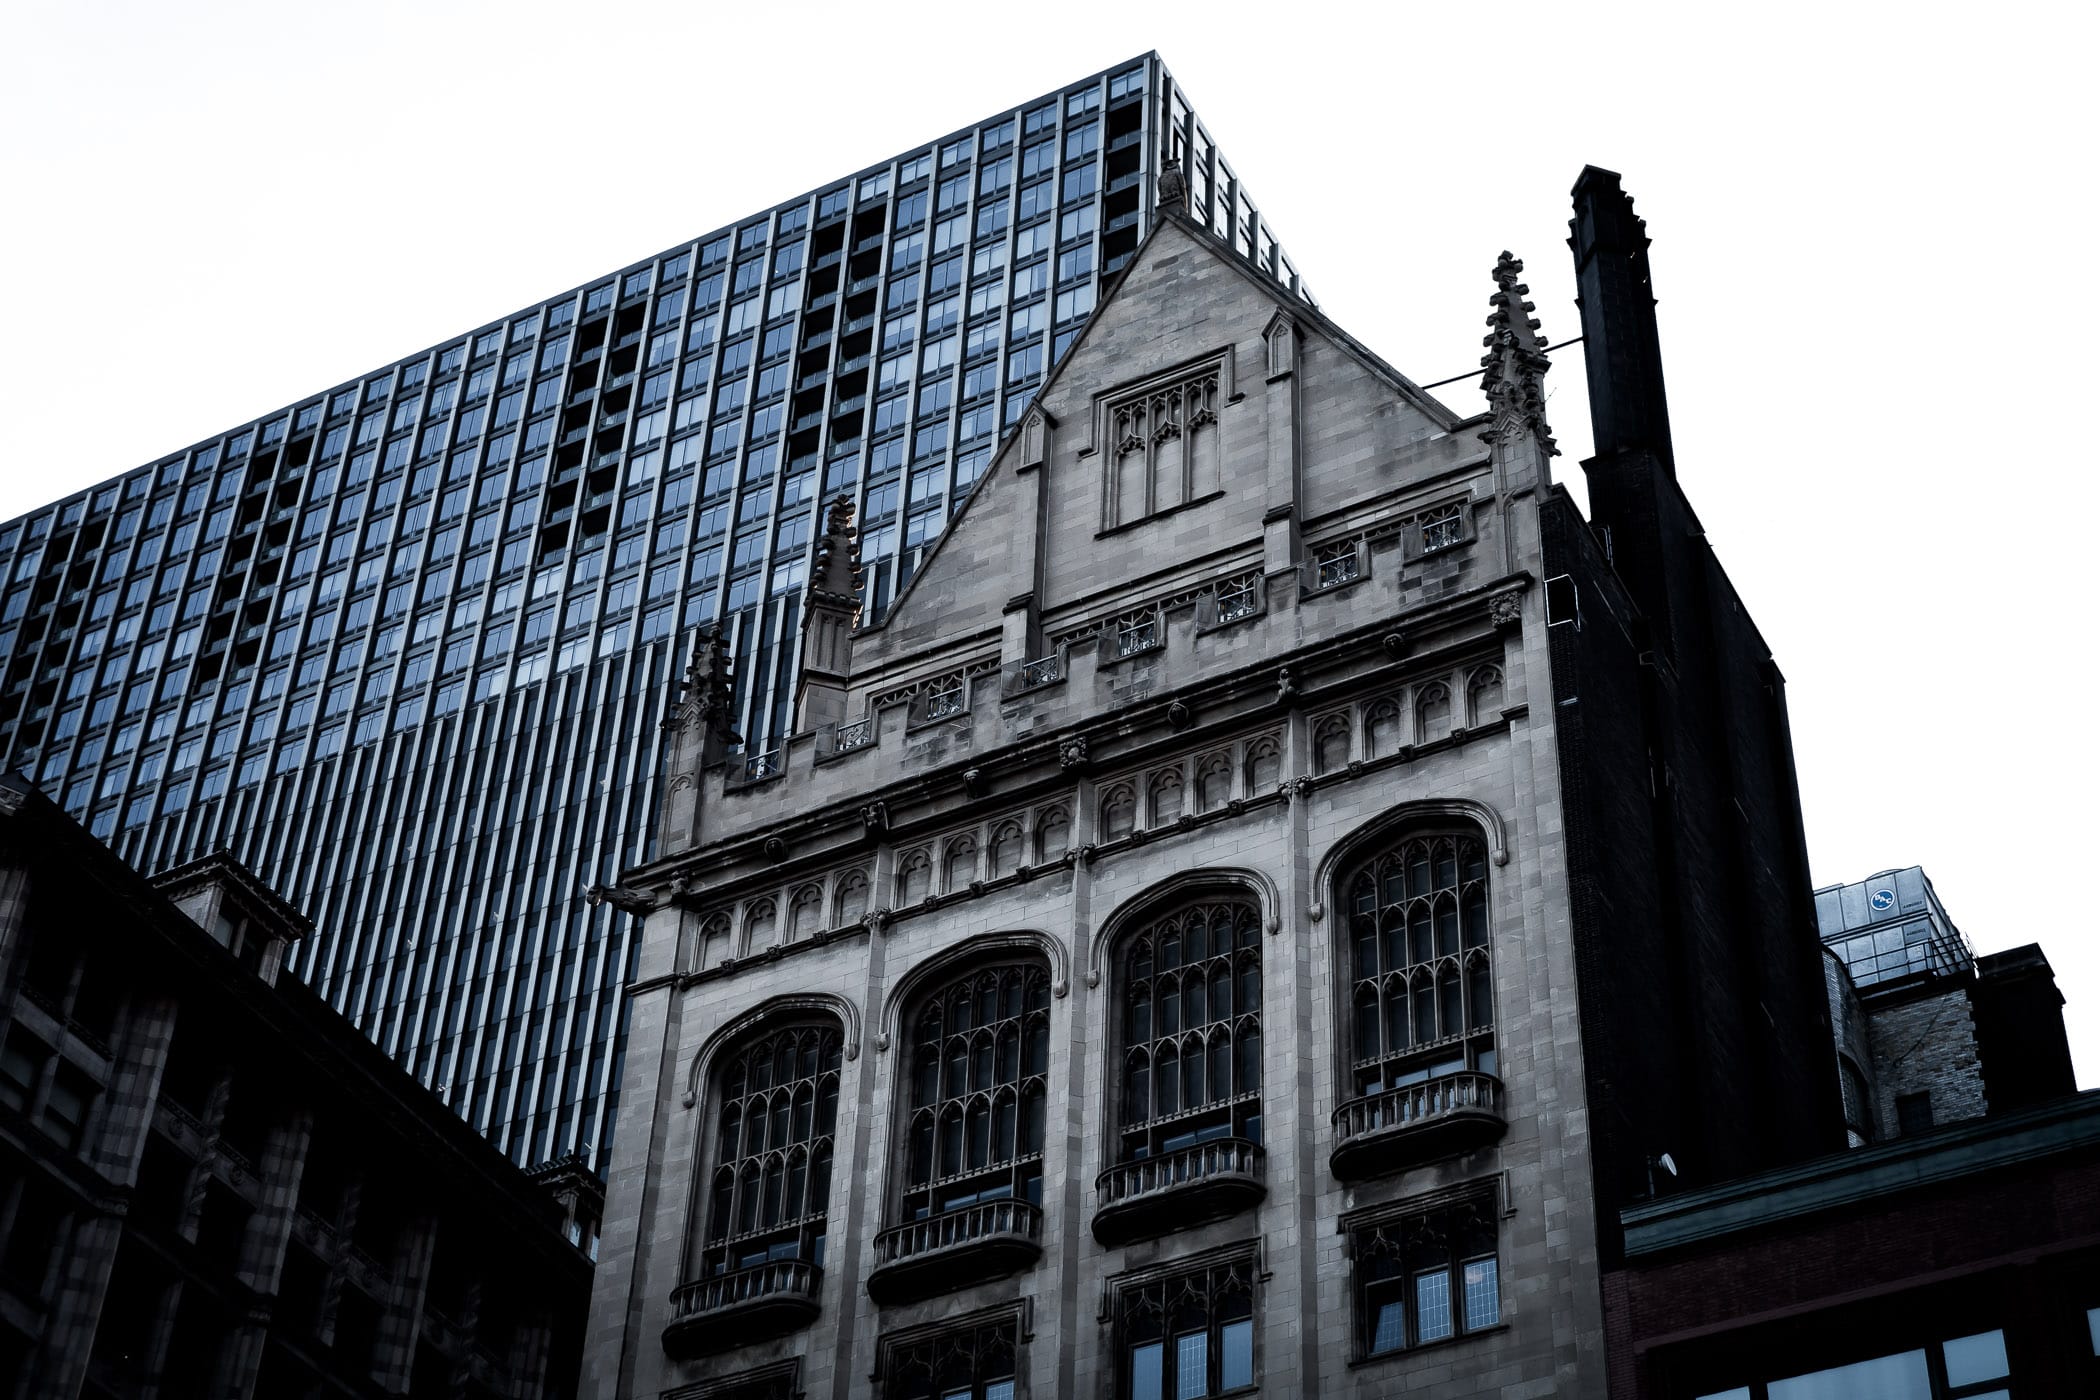 The gothic-styled University Club of Chicago building is dwarfed by the nearby Mid-Continental Plaza.